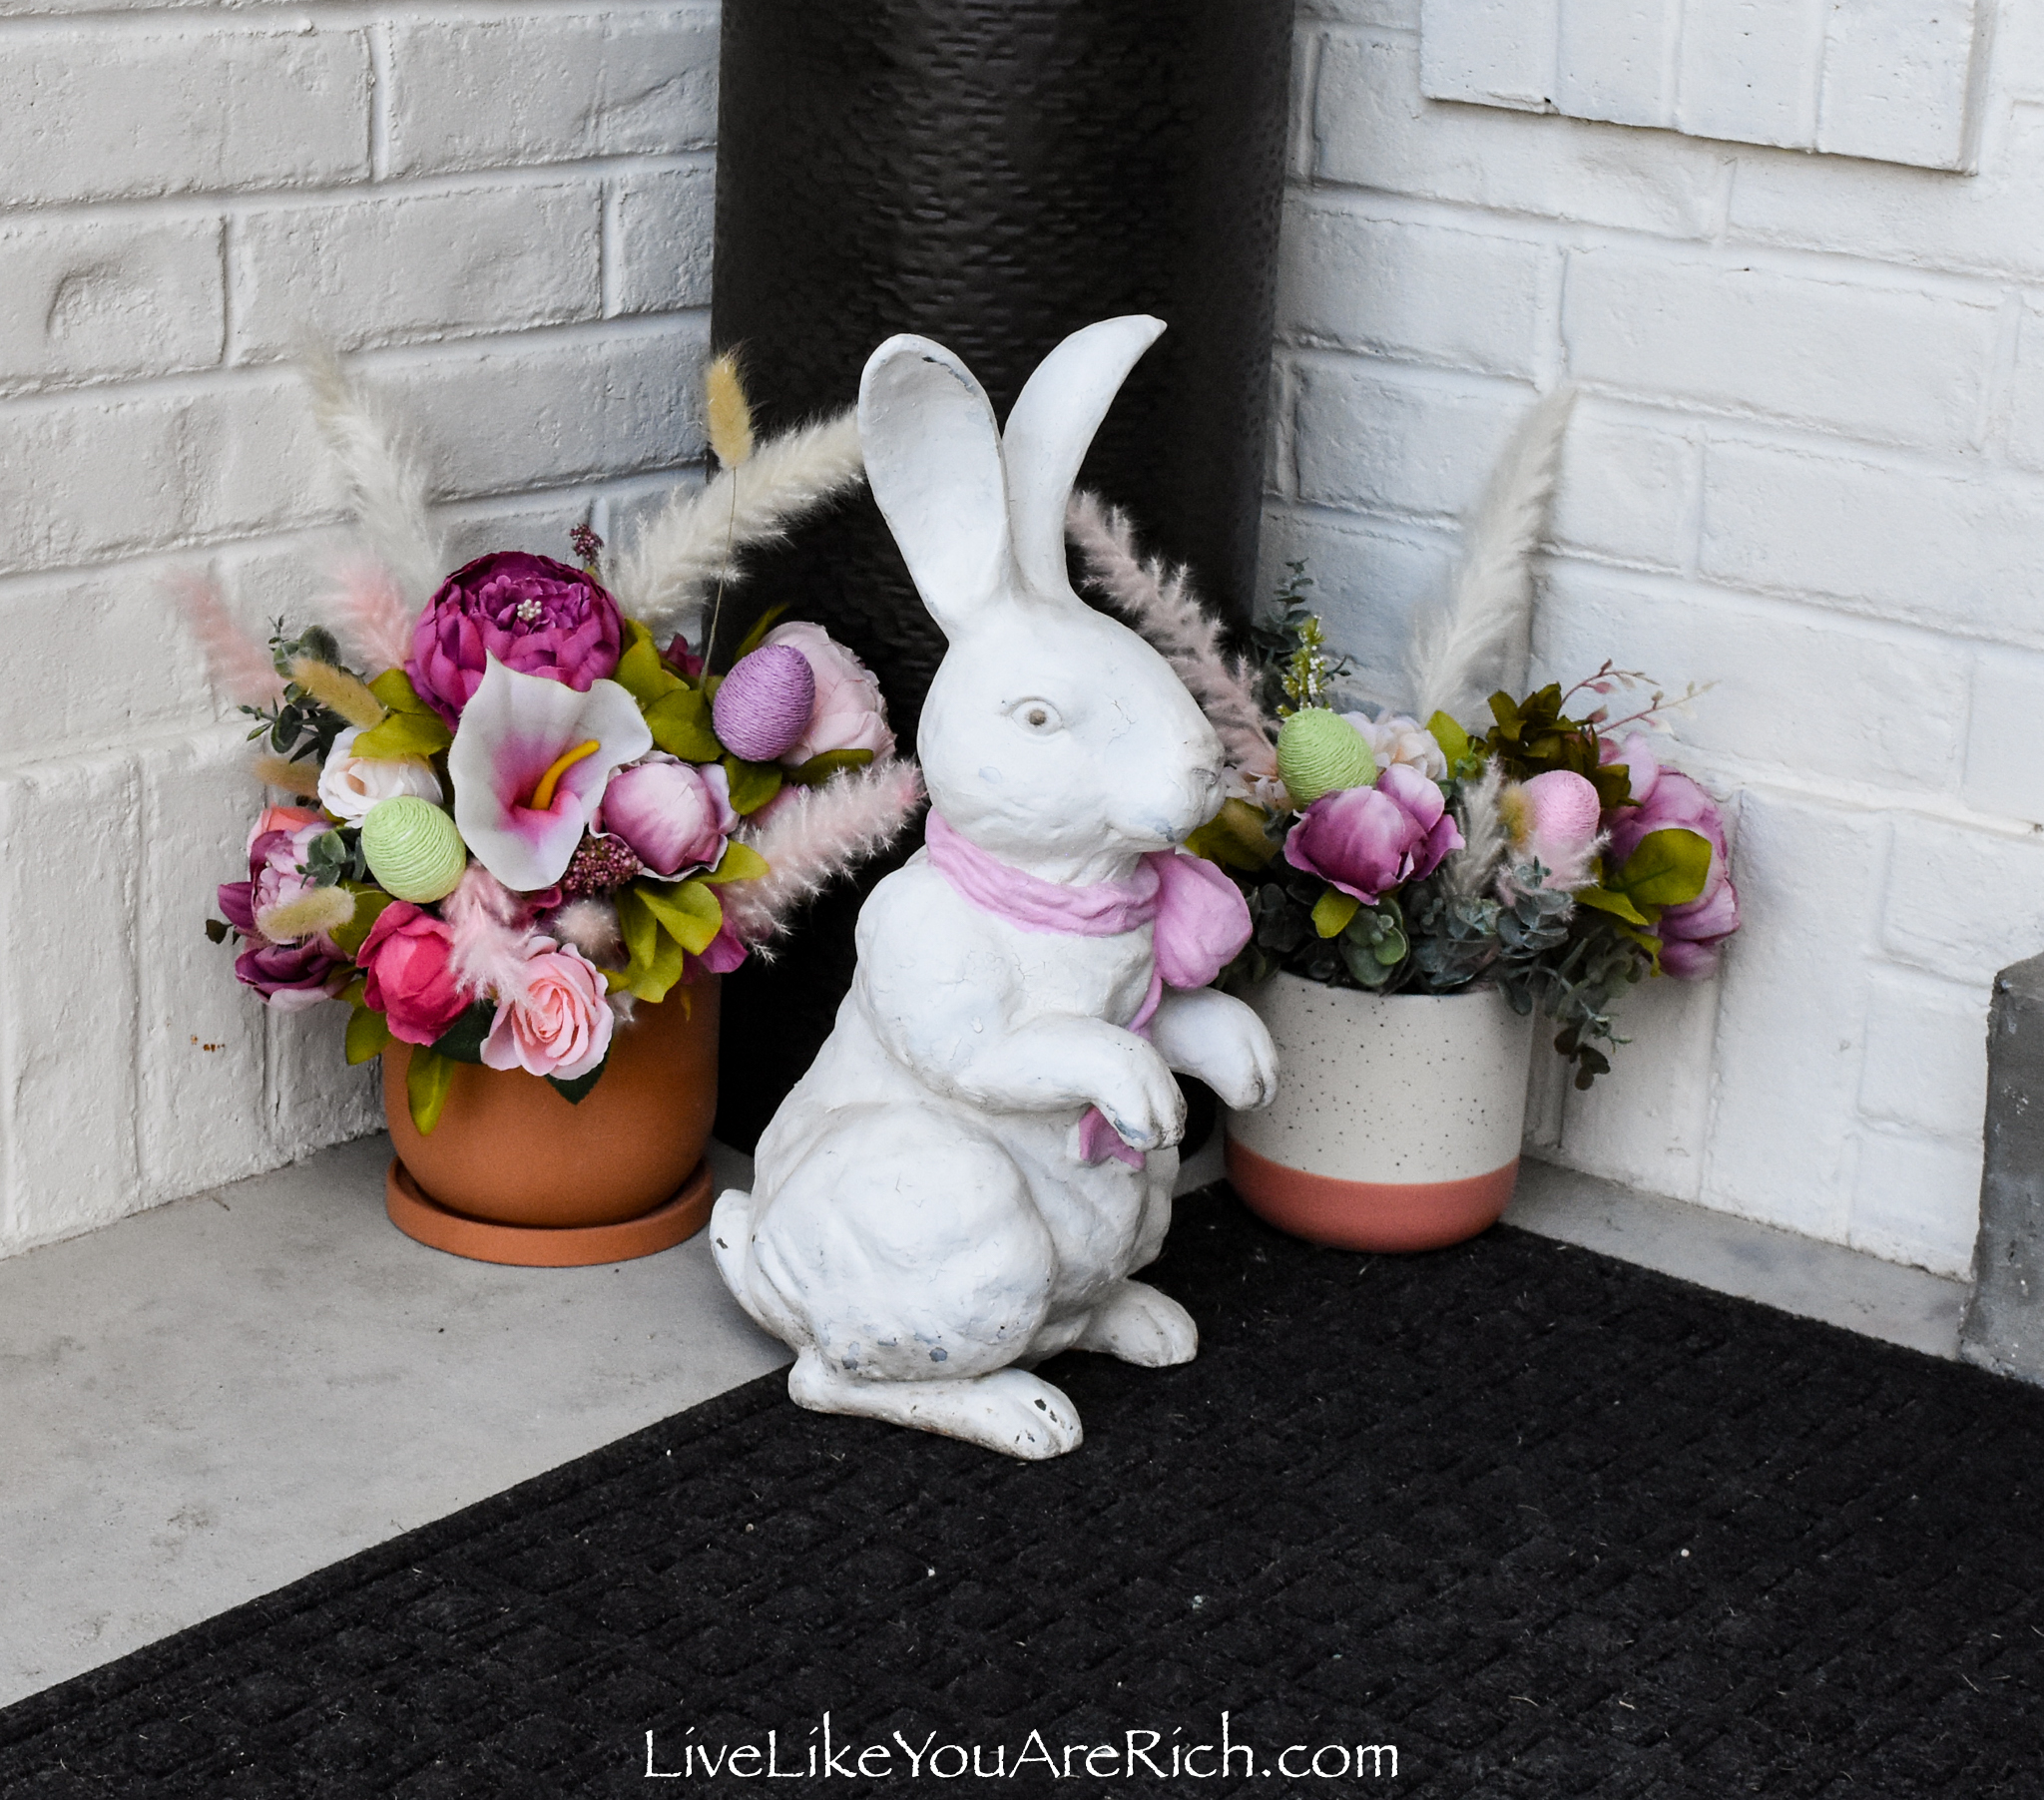 Flowers and bunny